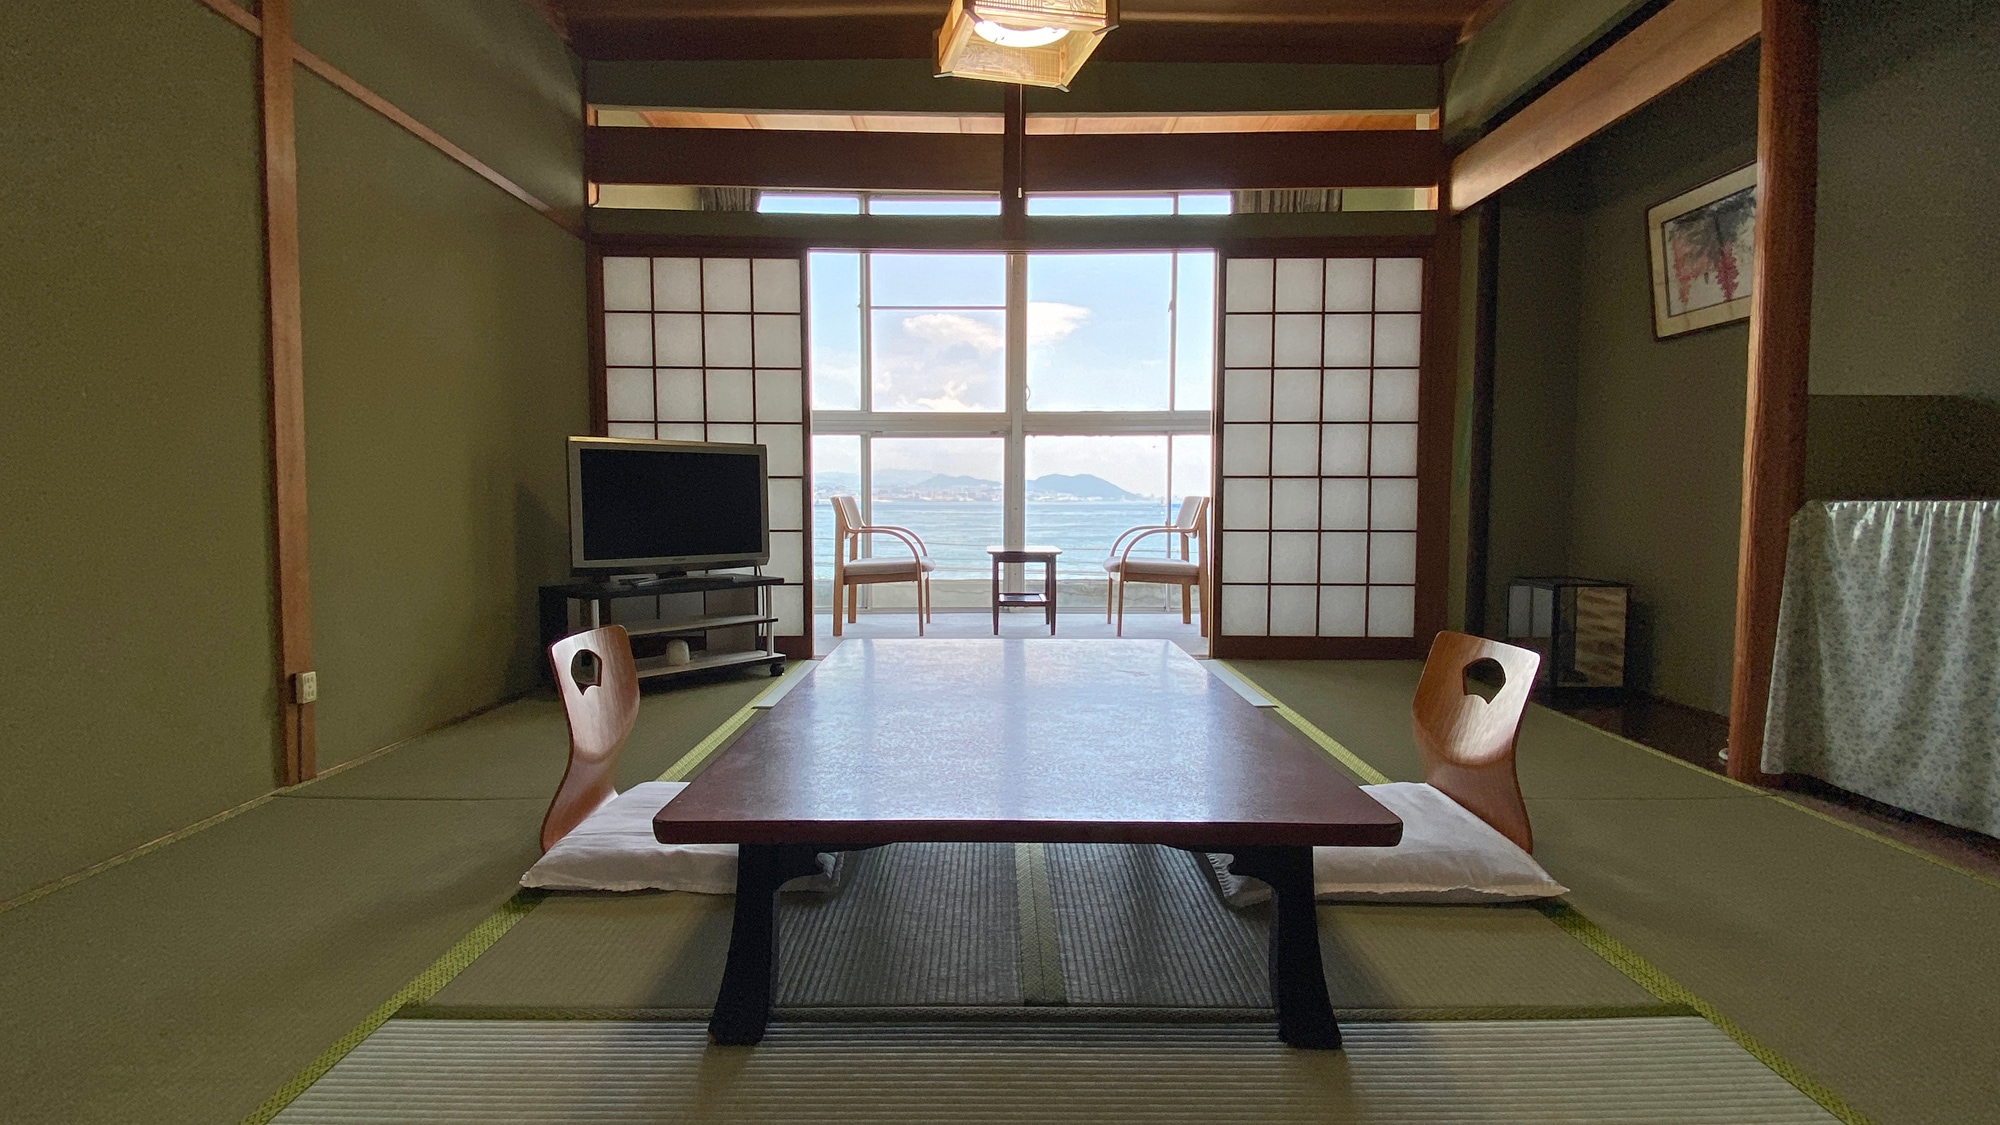 [Annex] You can see the Seto Inland Sea from your room.